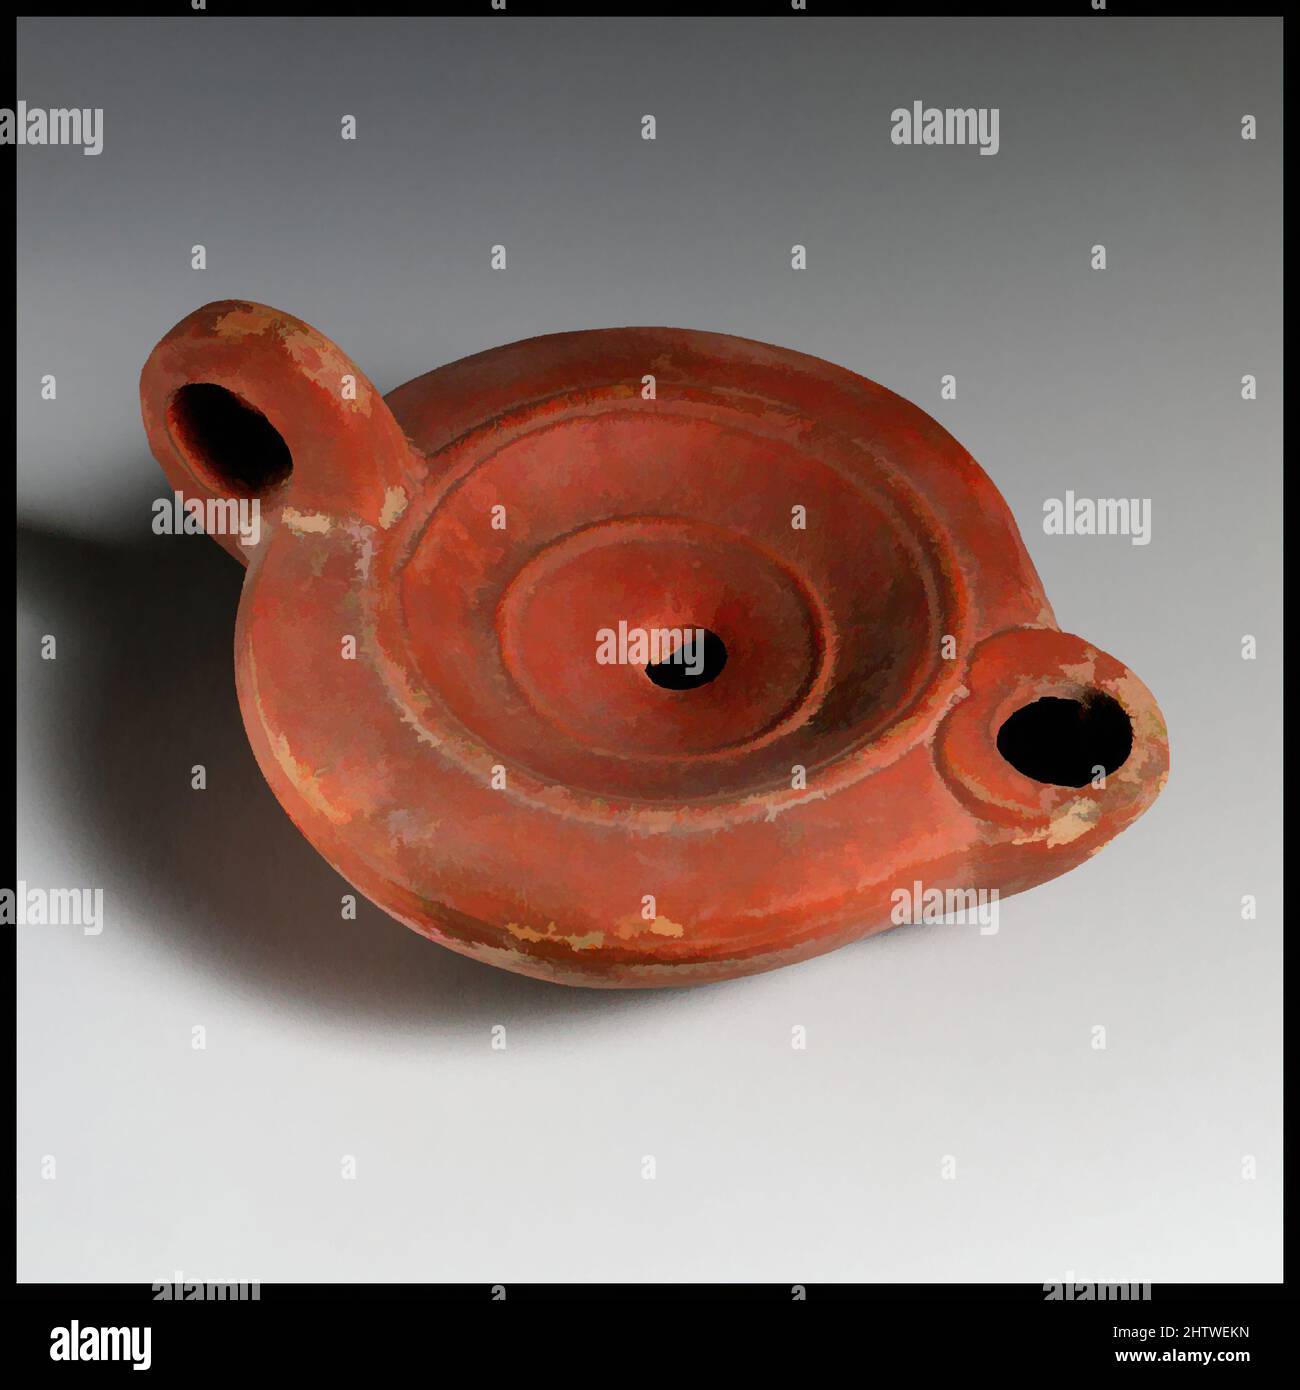 Art inspired by Lamp, Roman, Cypriot, Terracotta, Overall: 1 5/8 x 3 1/2 in. (4.1 x 8.9 cm), Terracottas, Classic works modernized by Artotop with a splash of modernity. Shapes, color and value, eye-catching visual impact on art. Emotions through freedom of artworks in a contemporary way. A timeless message pursuing a wildly creative new direction. Artists turning to the digital medium and creating the Artotop NFT Stock Photo